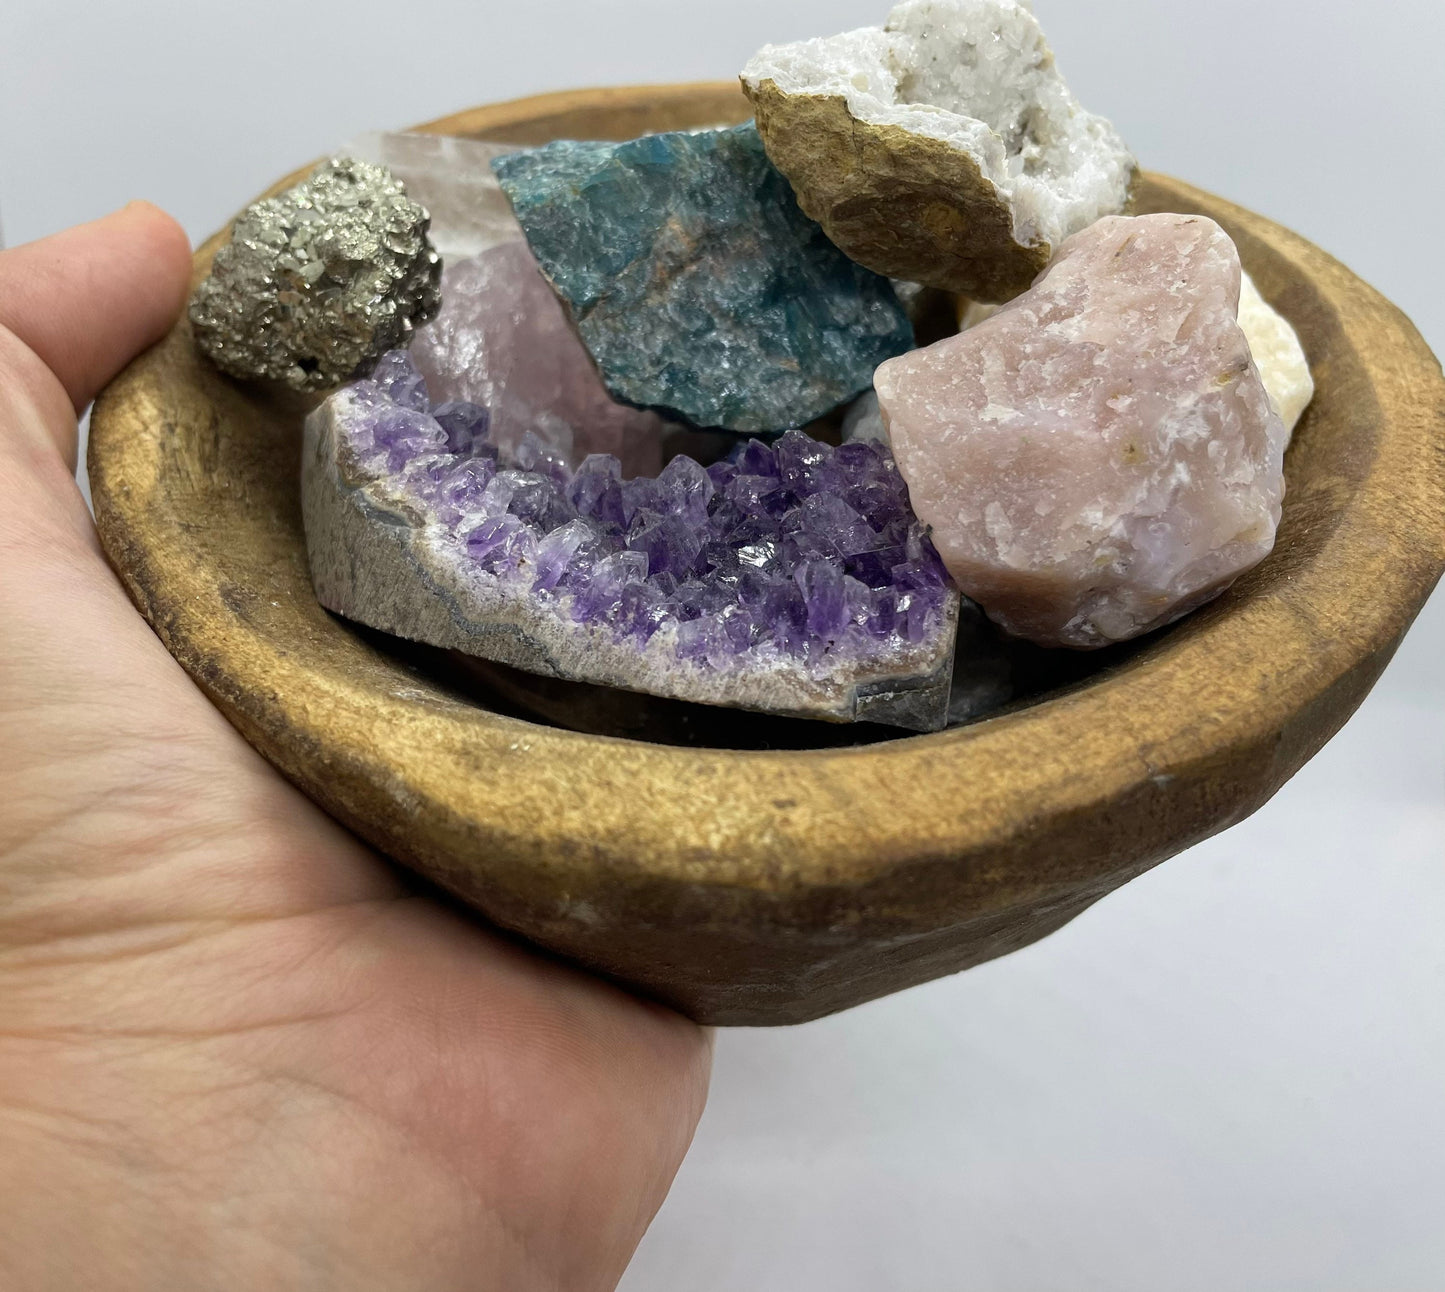 Gemstone Gift Set, Raw Crystals Gift Box, Boho Wedding Decor, Calming Office Decor, Desk Accessories for Women, Rocks and Geodes, Home Gifts